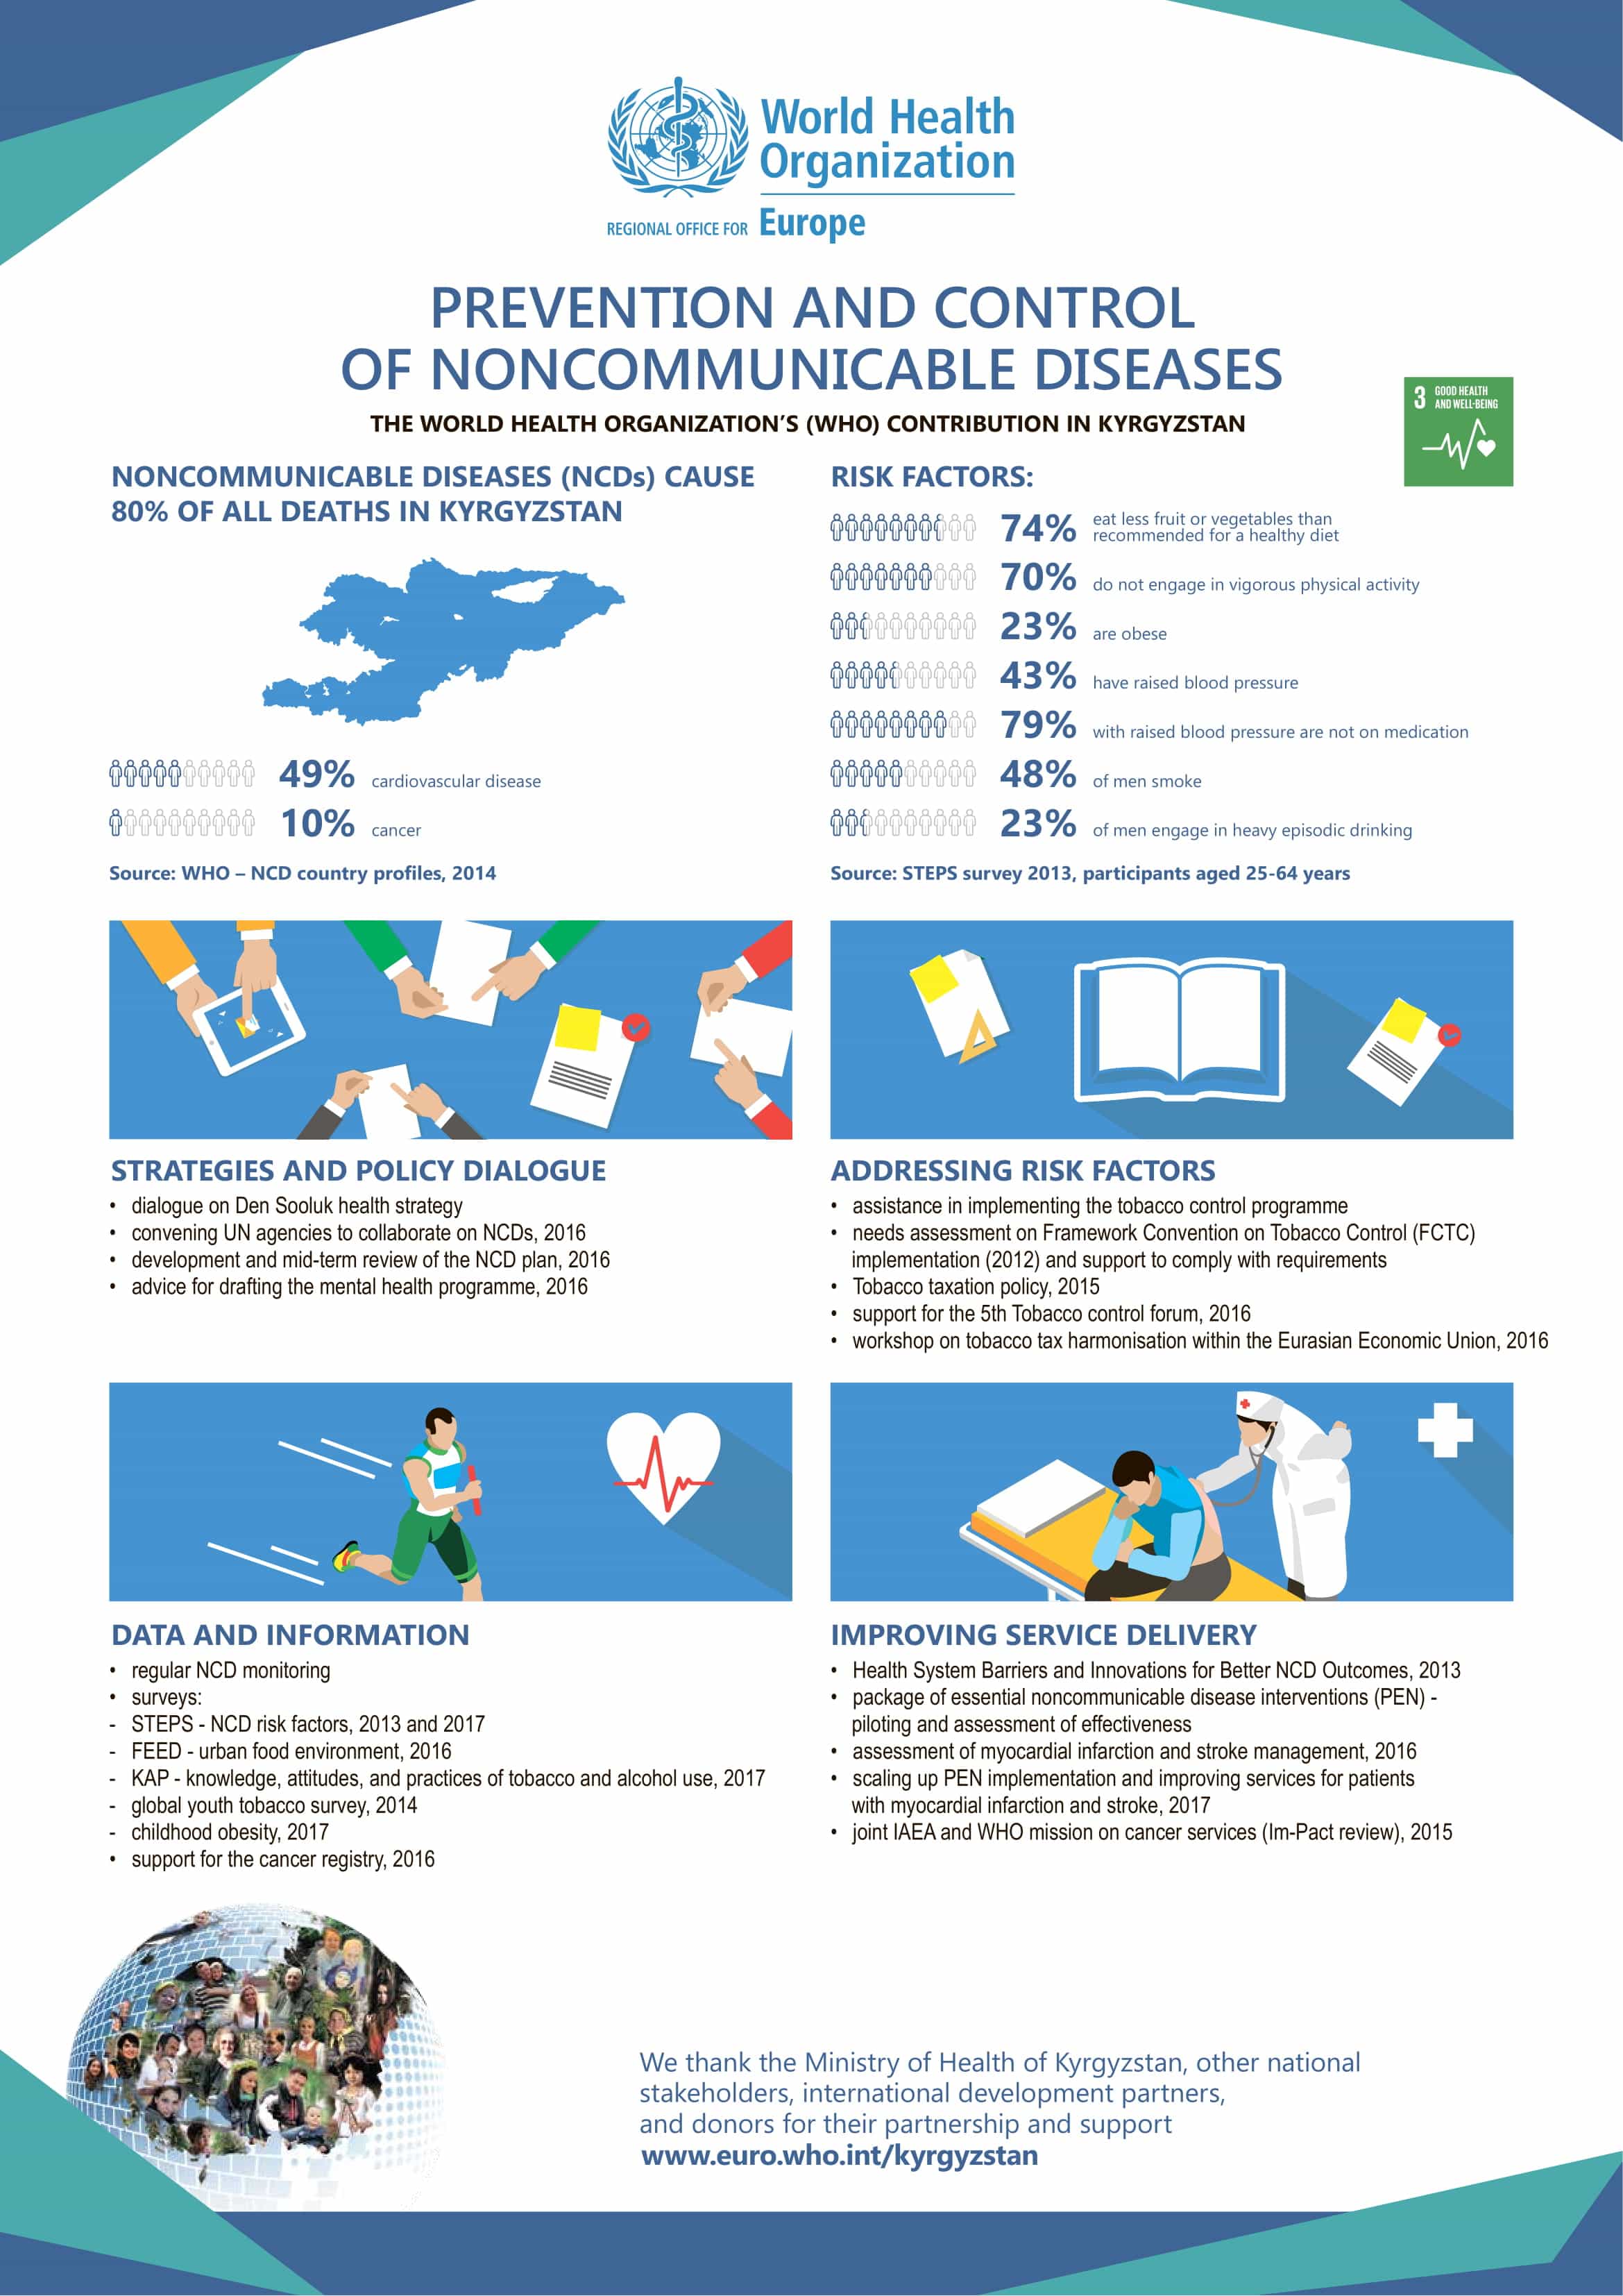 Prevention and control of noncommunicable diseases